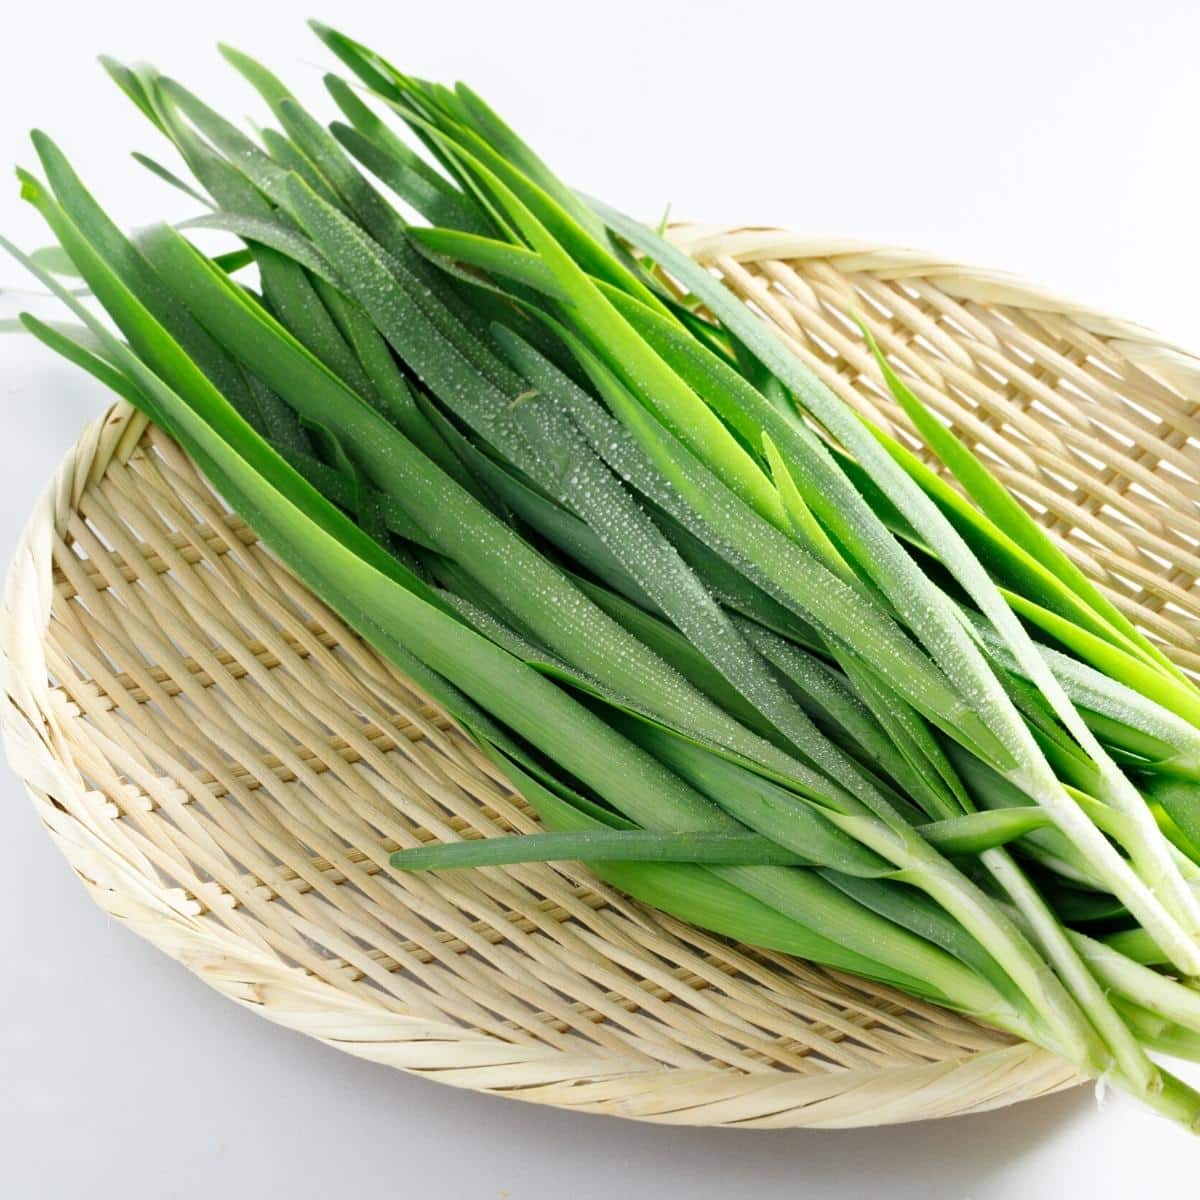 A wooden basket filled with Chinese chives.